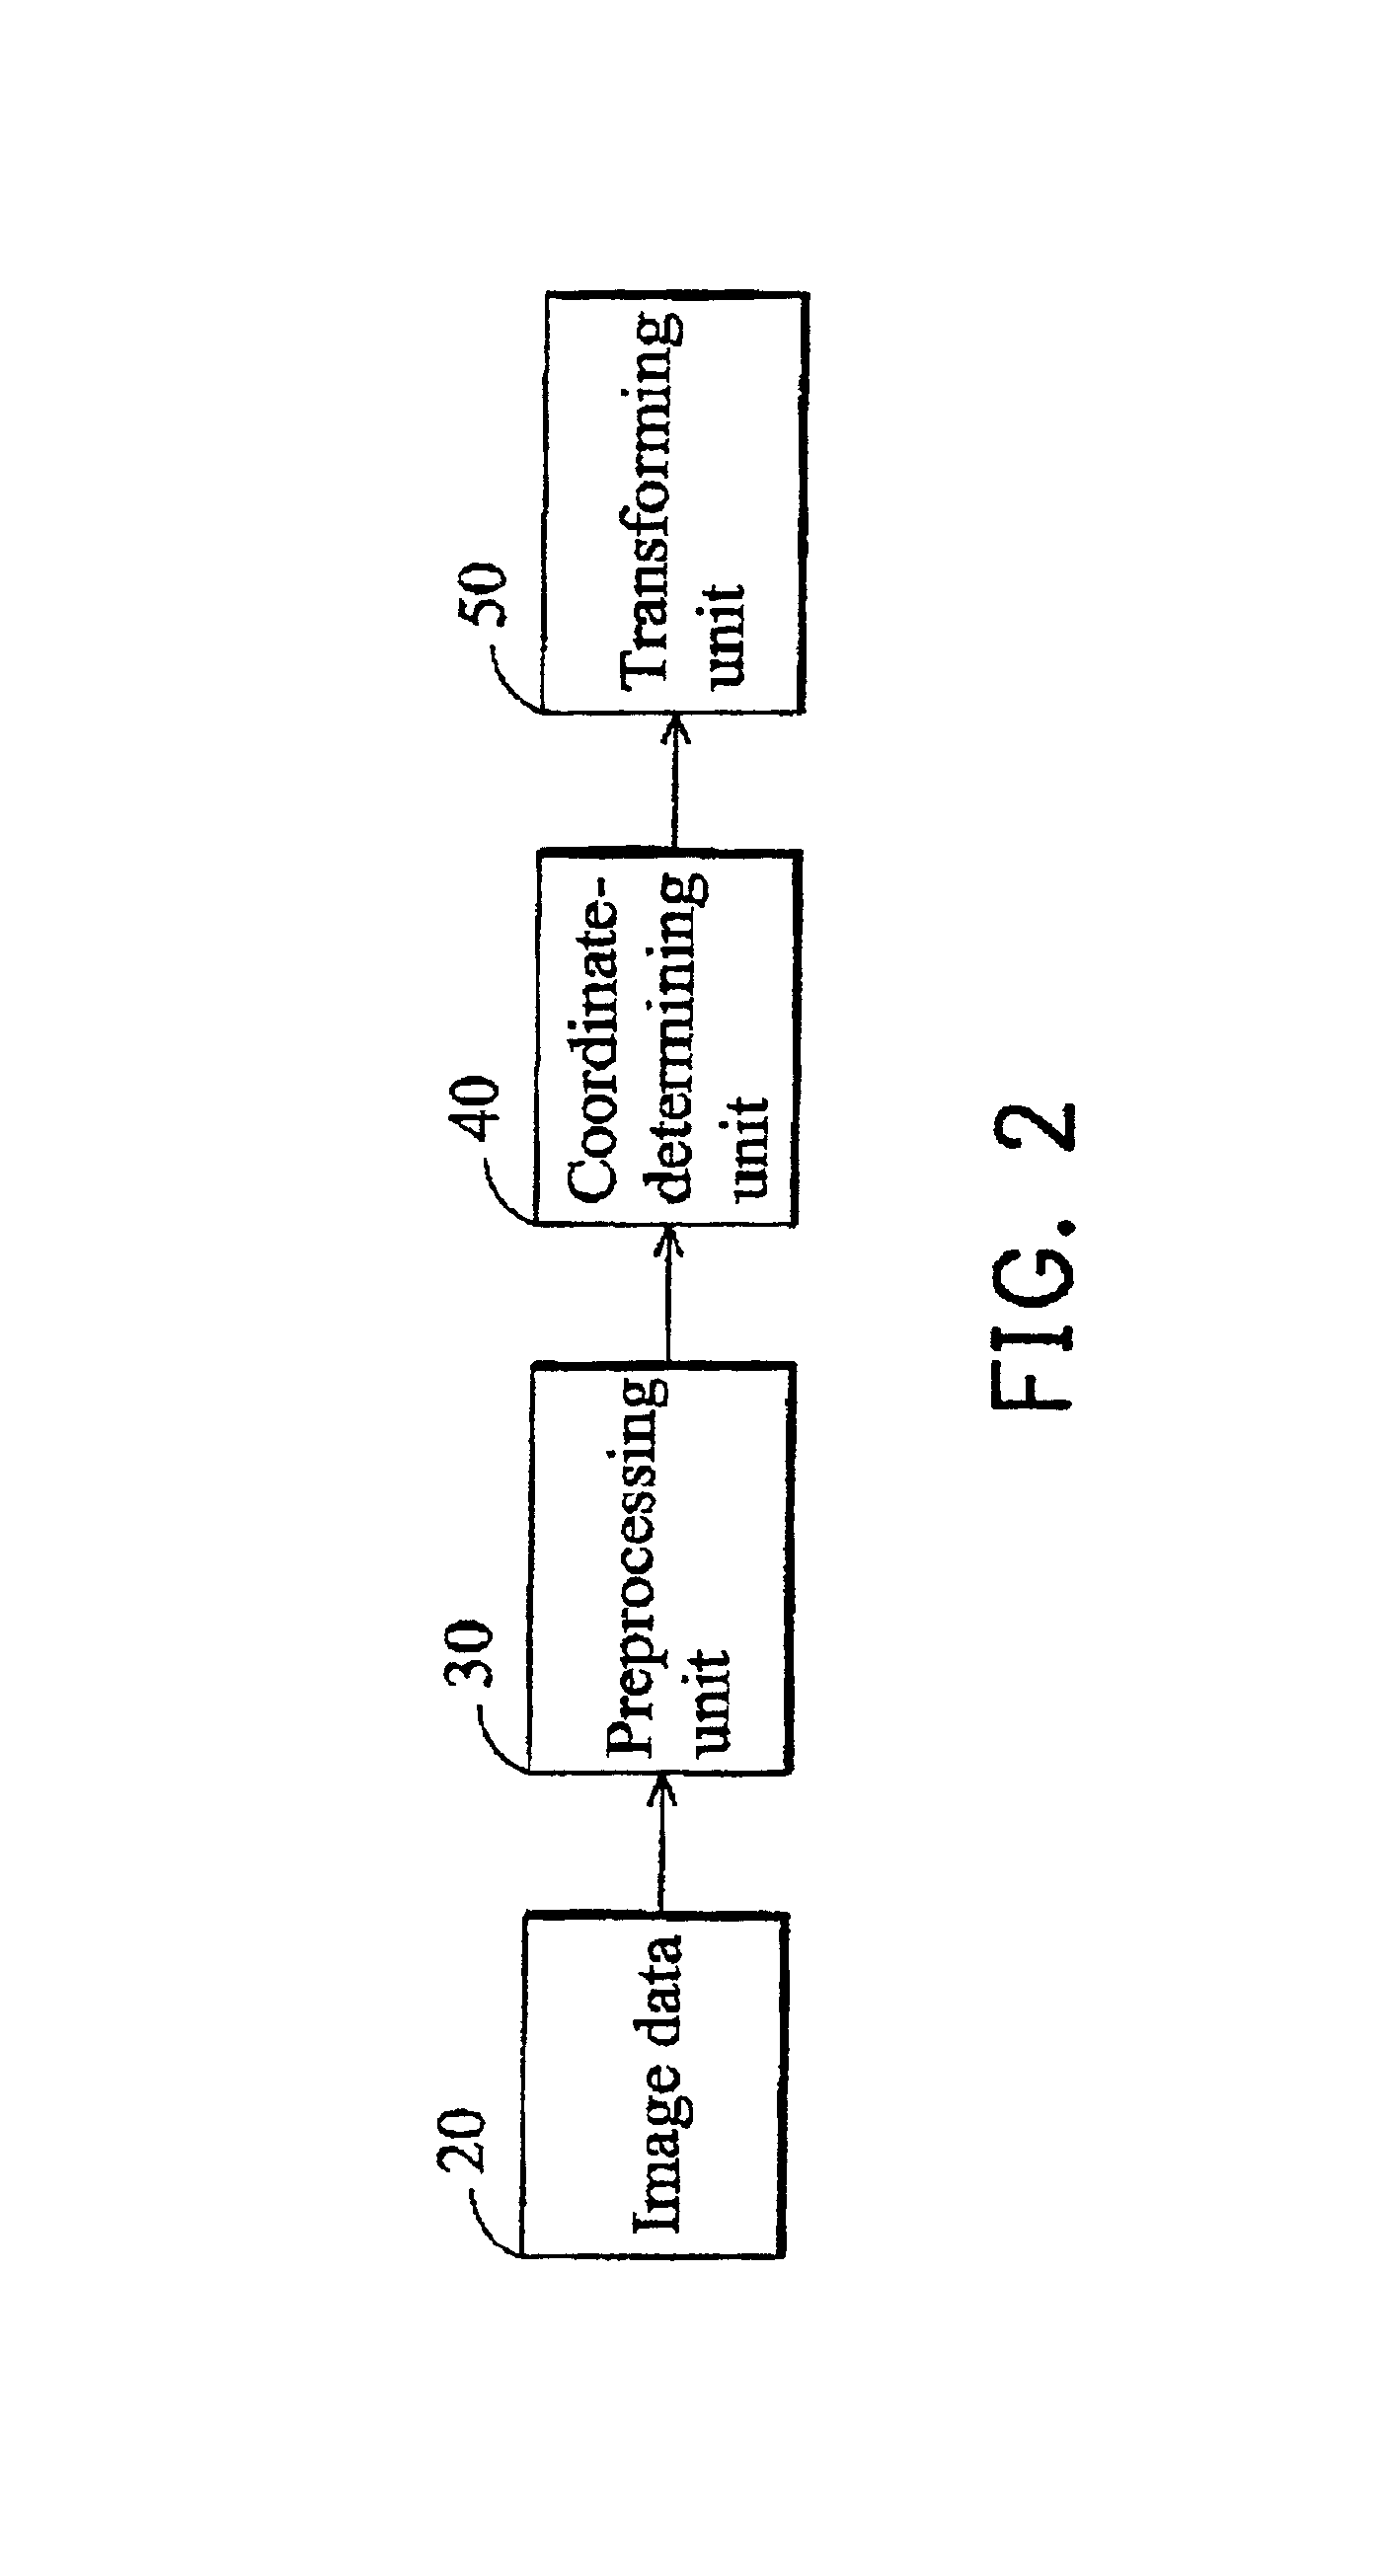 Method of correcting an image with perspective distortion and producing an artificial image with perspective distortion